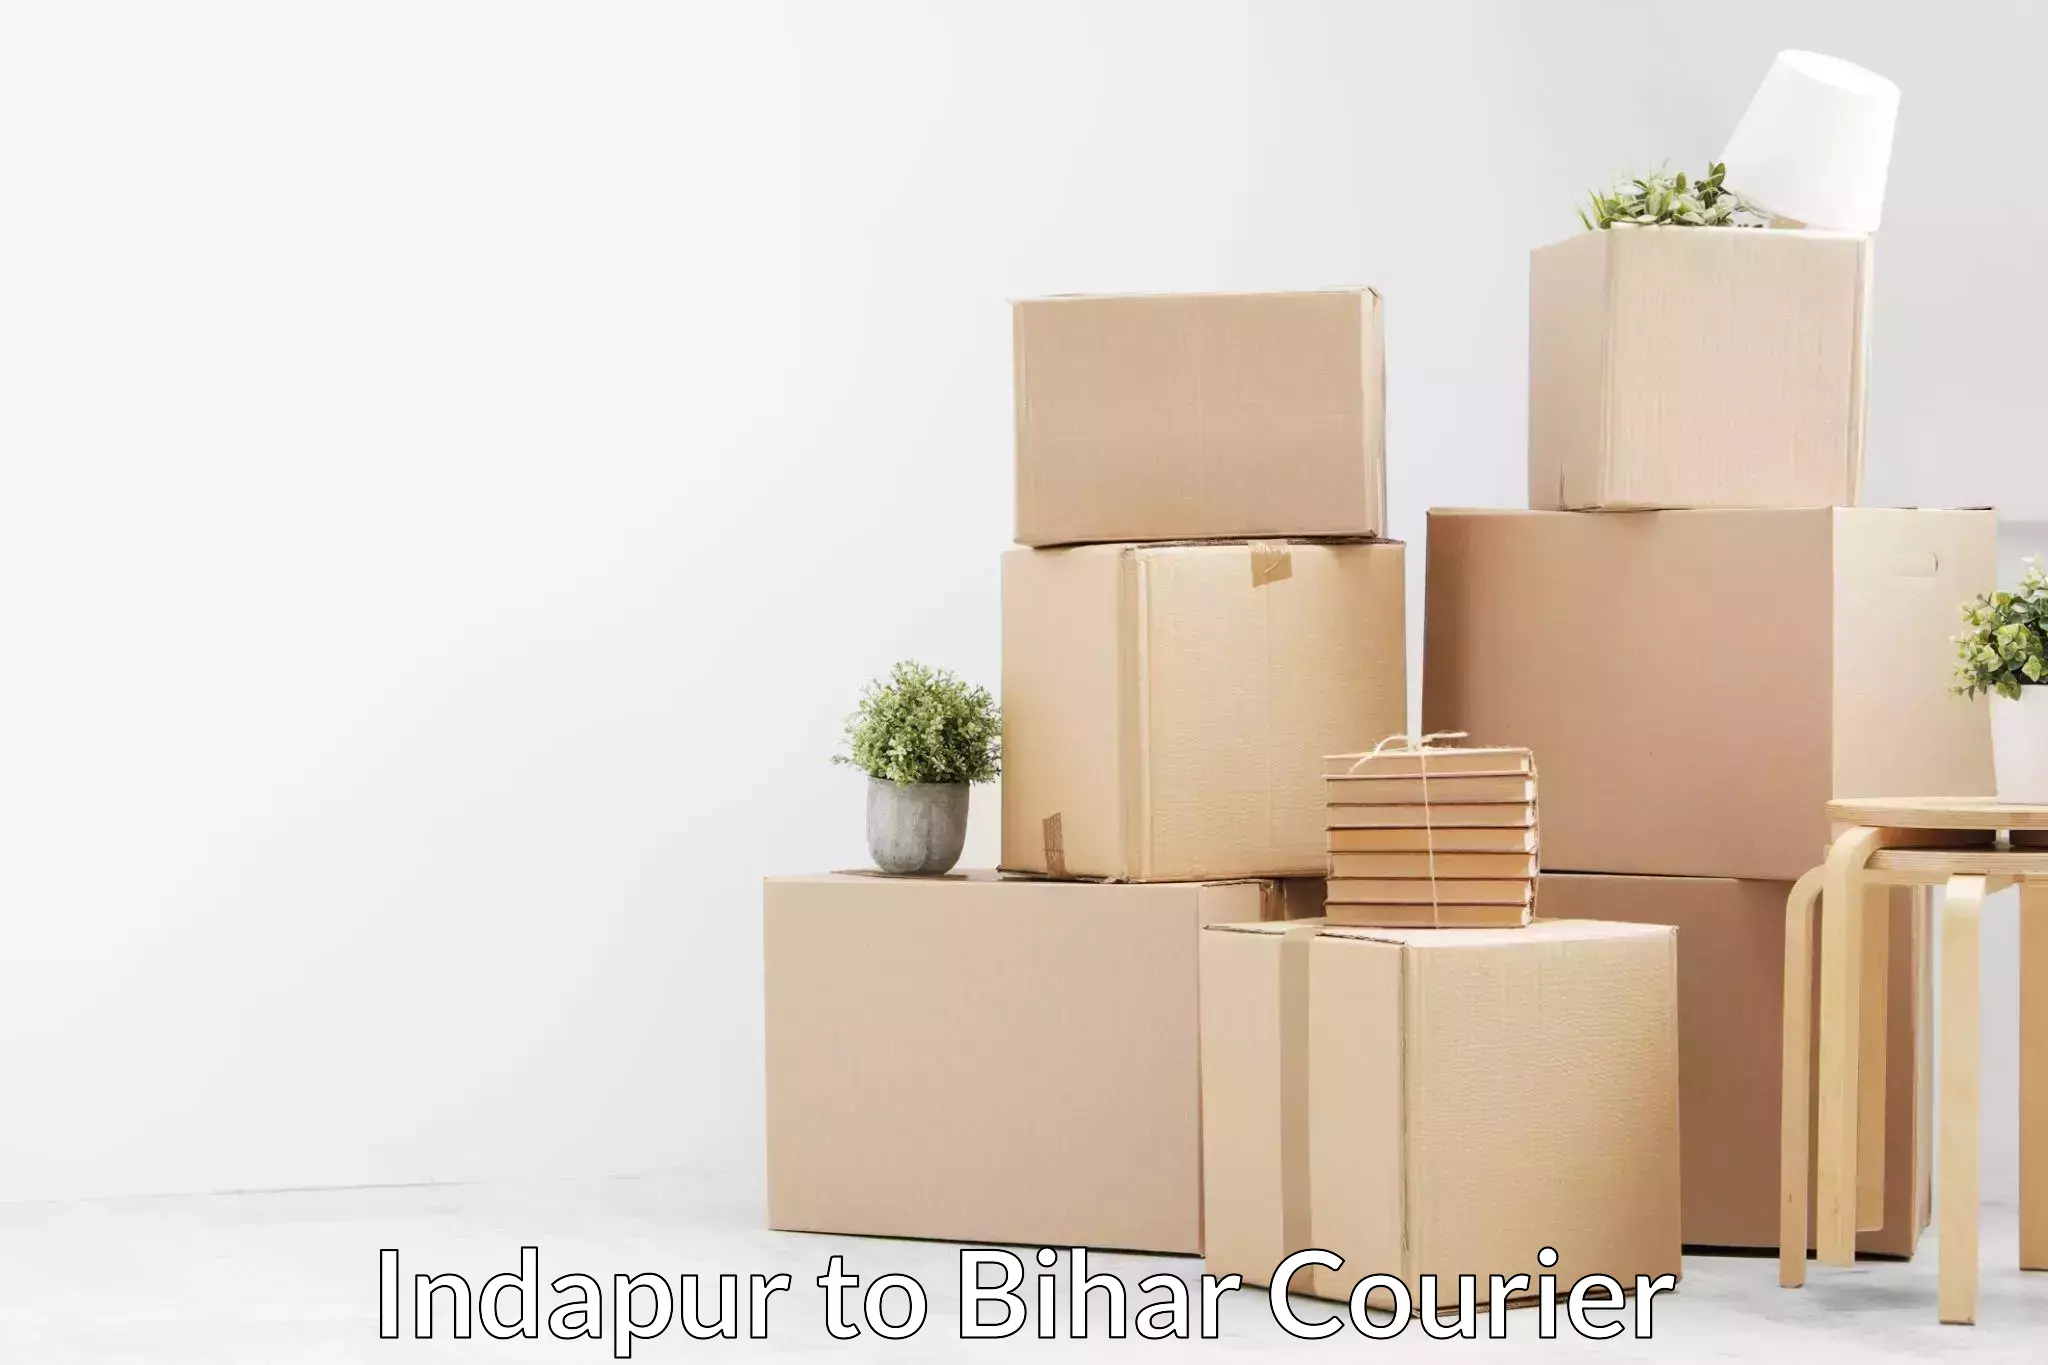 Interstate household moving Indapur to Bihar